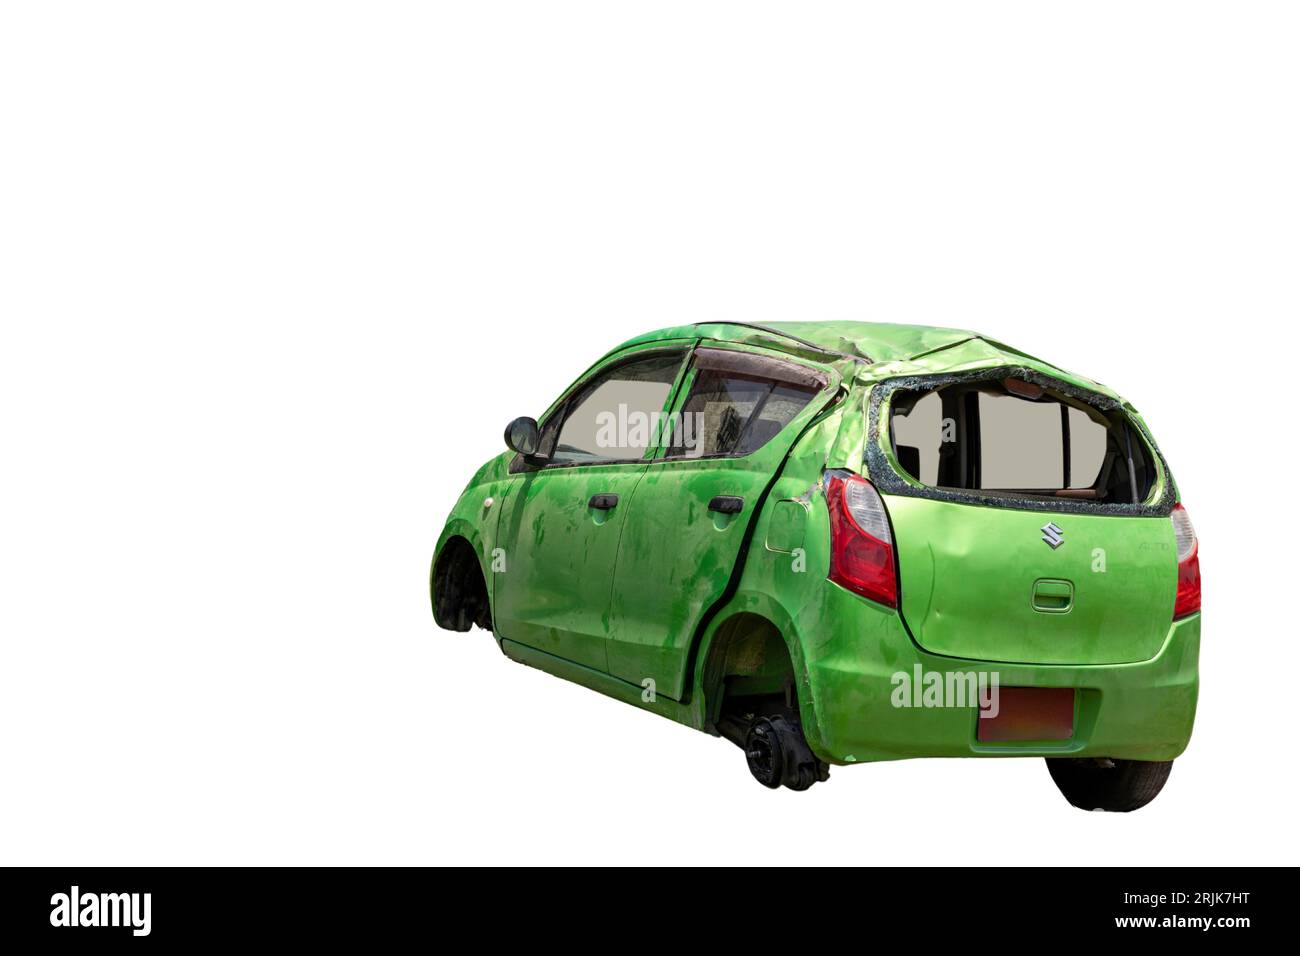 Suzuki car after road accident on white background: Swat,Pakistan - June 10, 2023. Stock Photo